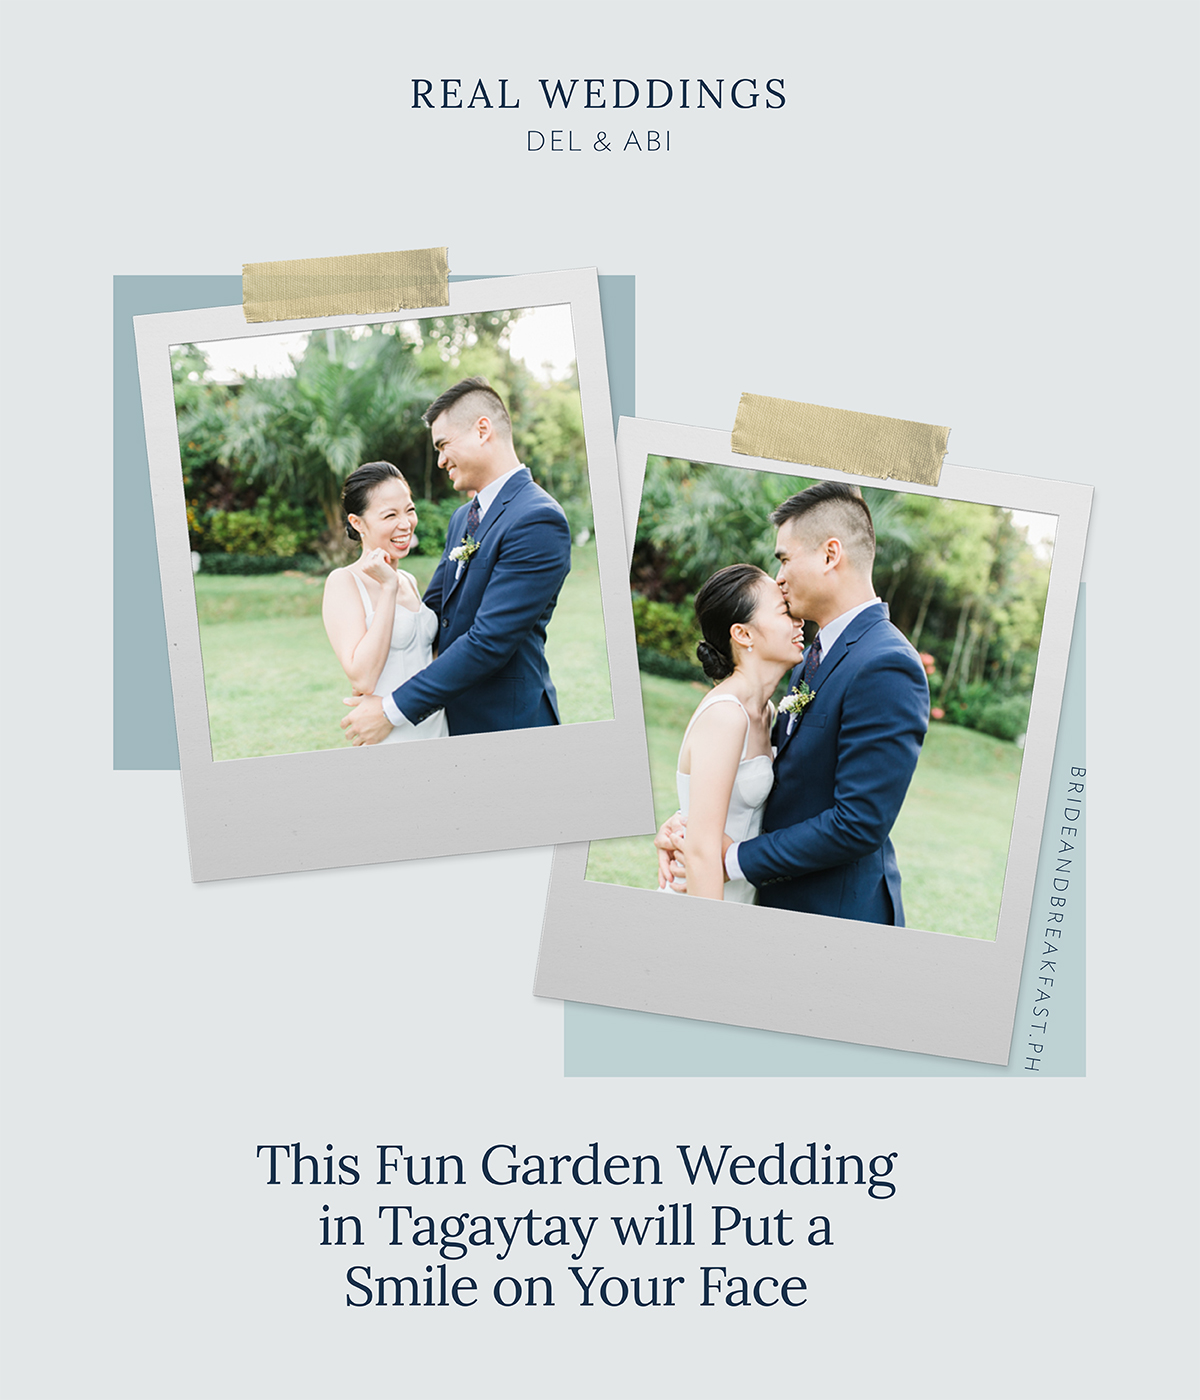 This Fun Garden Wedding in Tagaytay will Put a Smile on Your Face